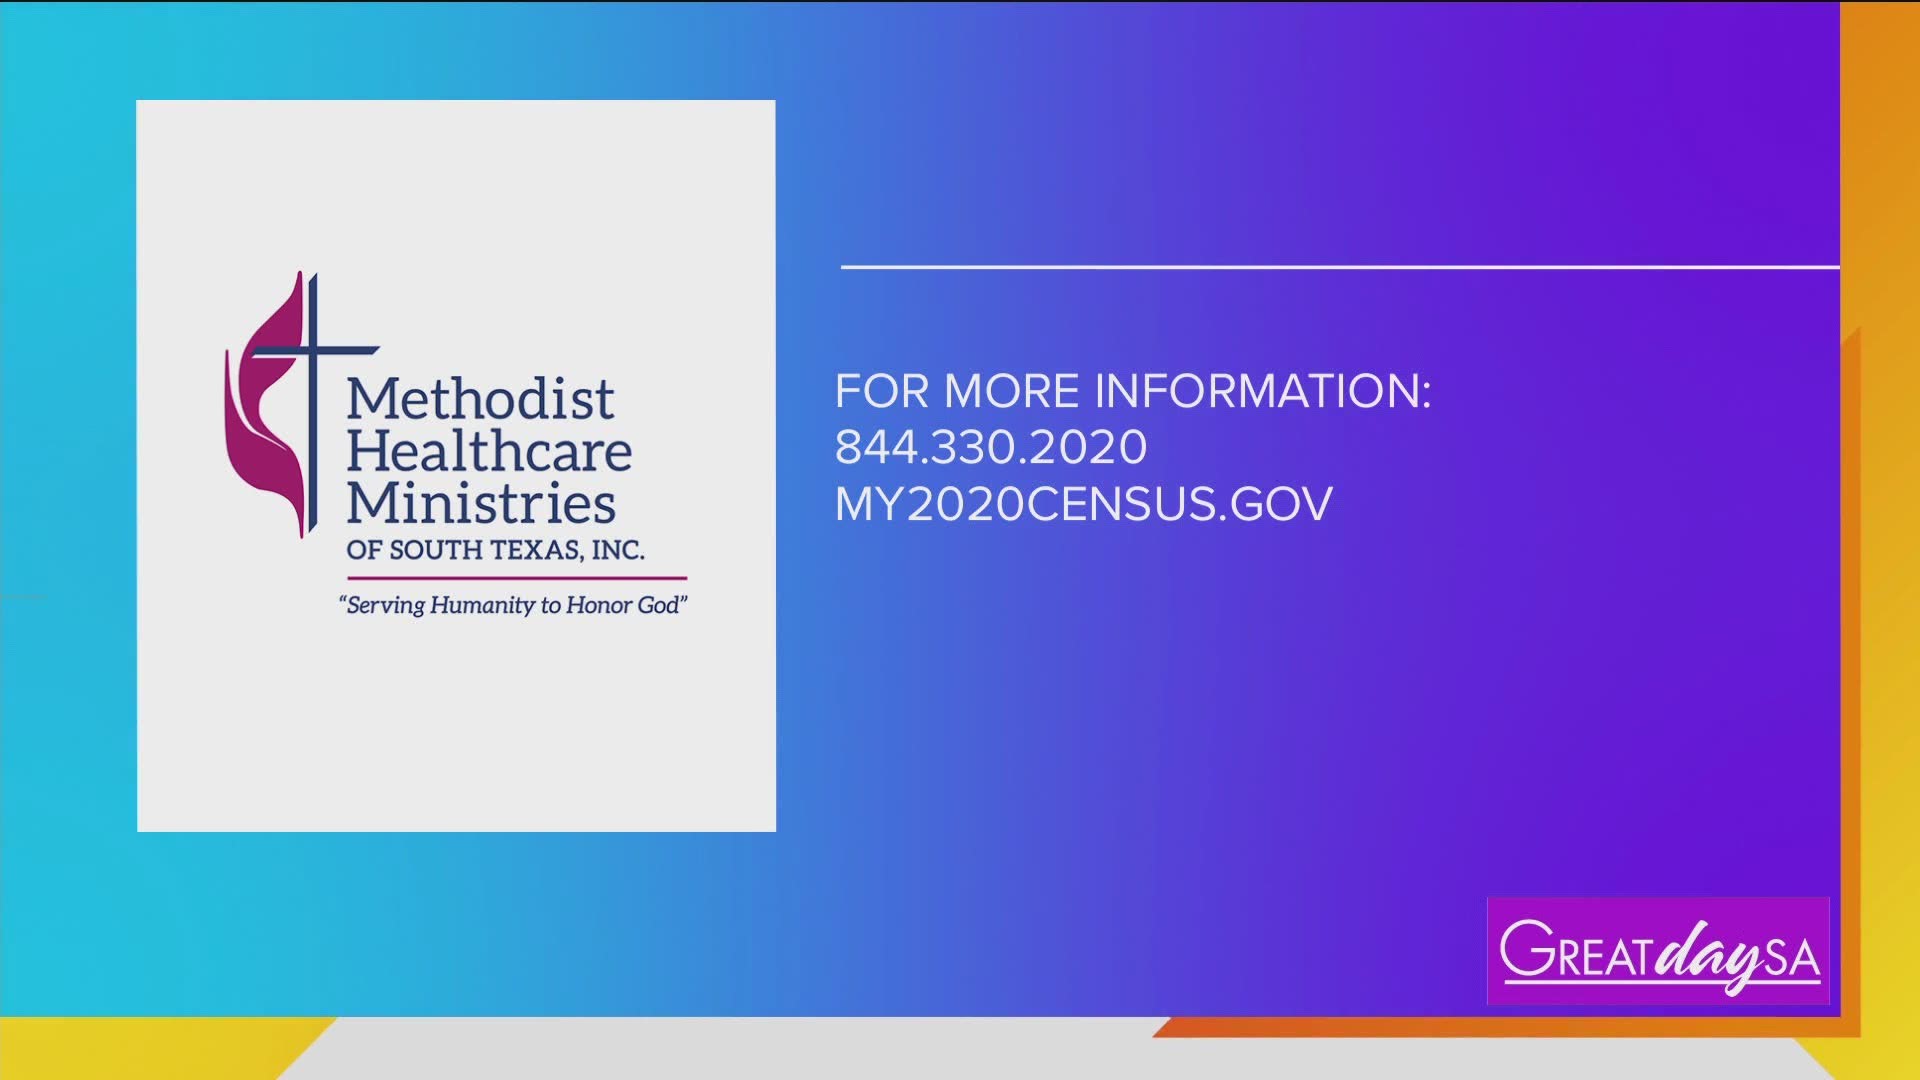 The deadline to complete the 2020 Census is September 30th! Methodist Healthcare Ministries reminds us of the impact we can have in our community.